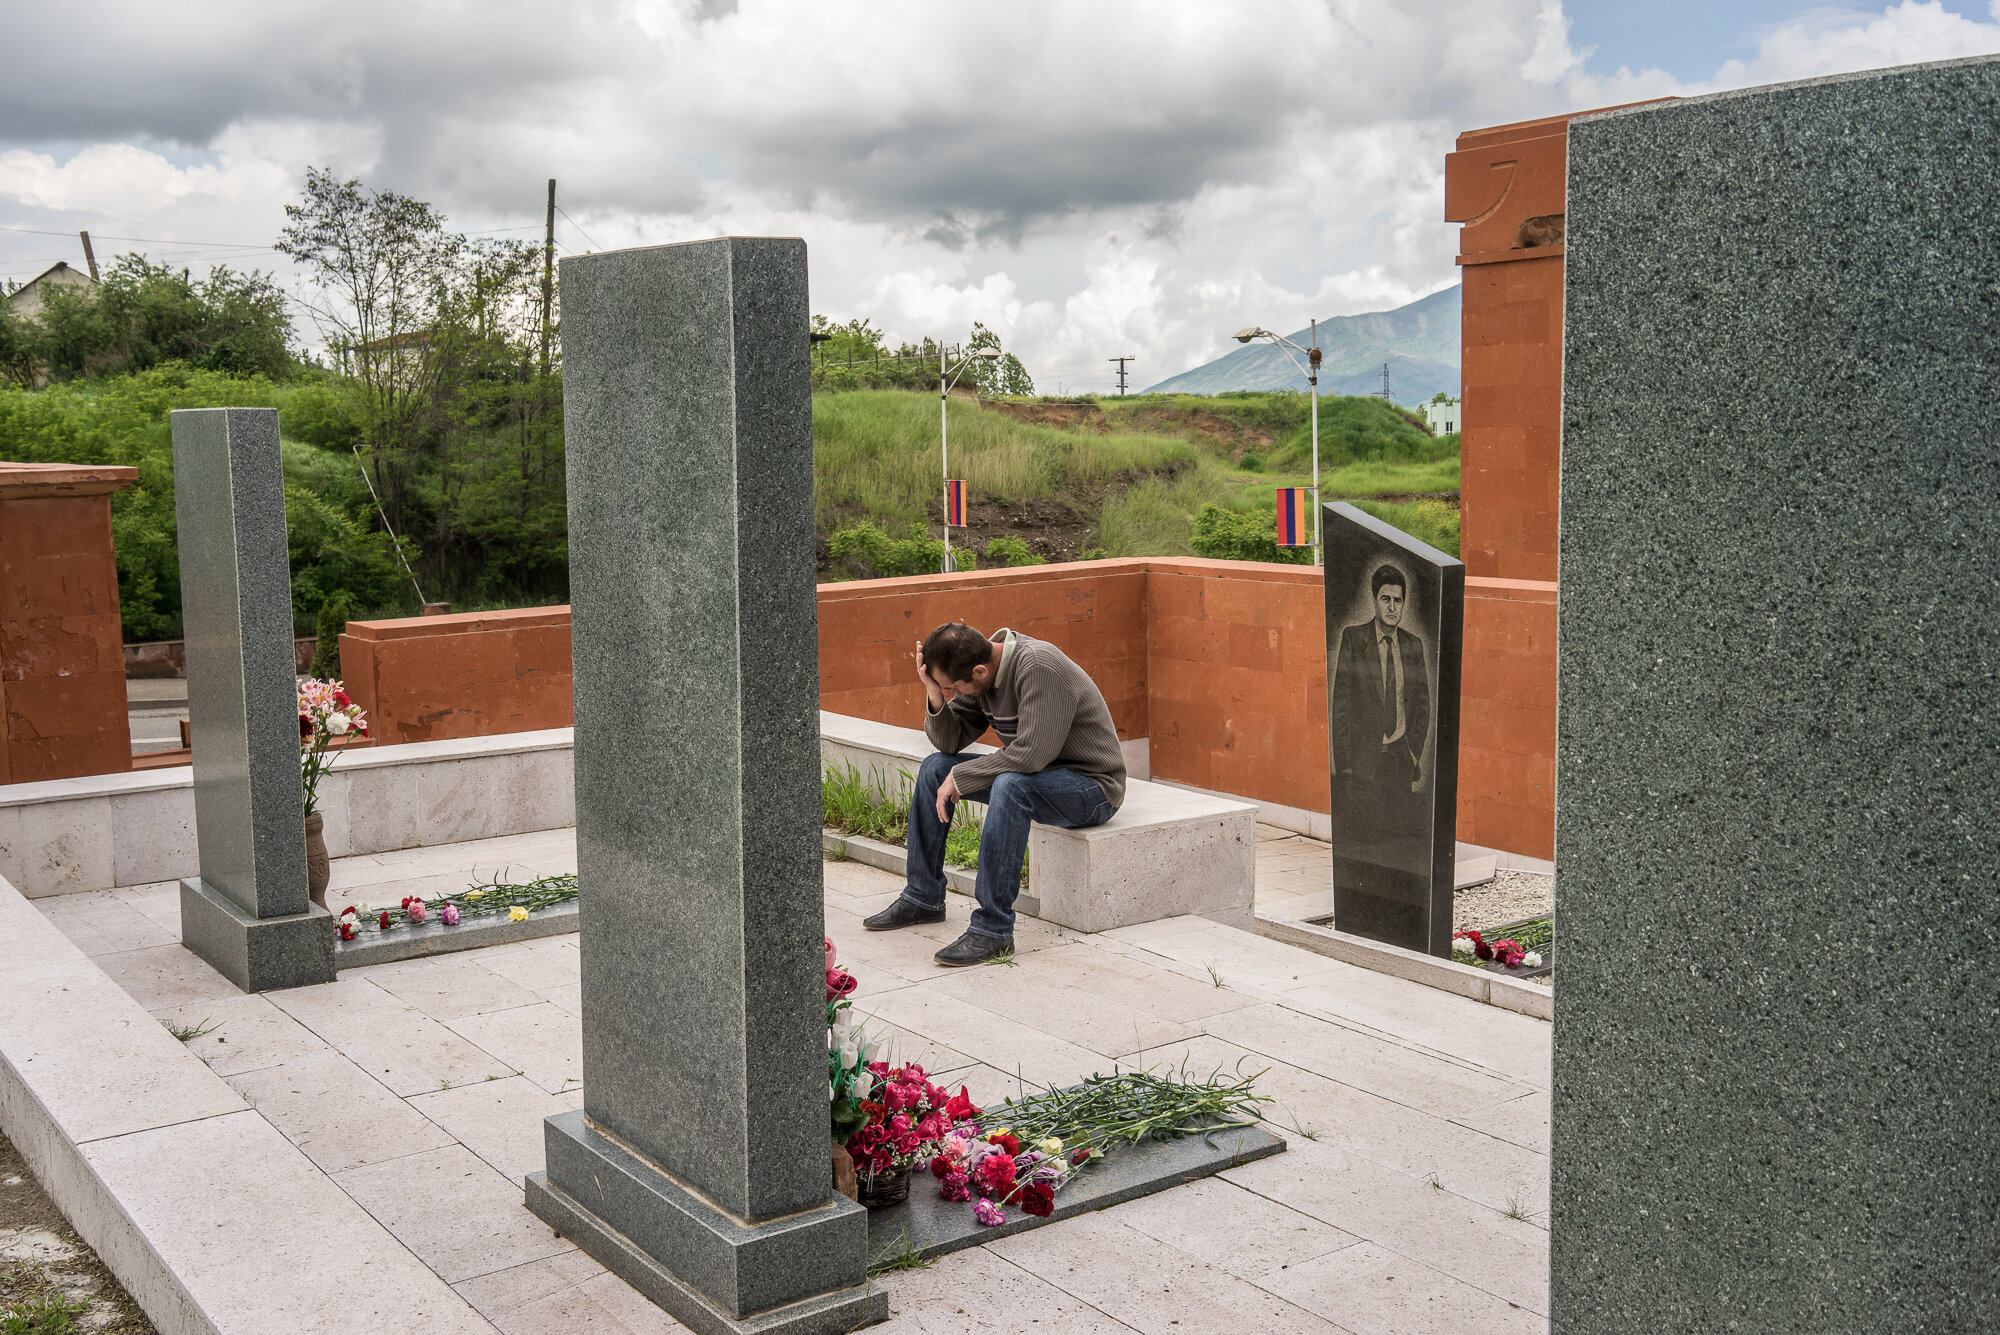  A man cries at the grave of a fighter killed in the 1990s war between Armenia and Azerbaijan following a ceremony commemorating both the victory over Nazi Germany in the Second World War as well as the fall of the strategic town of Shushi to Armenia